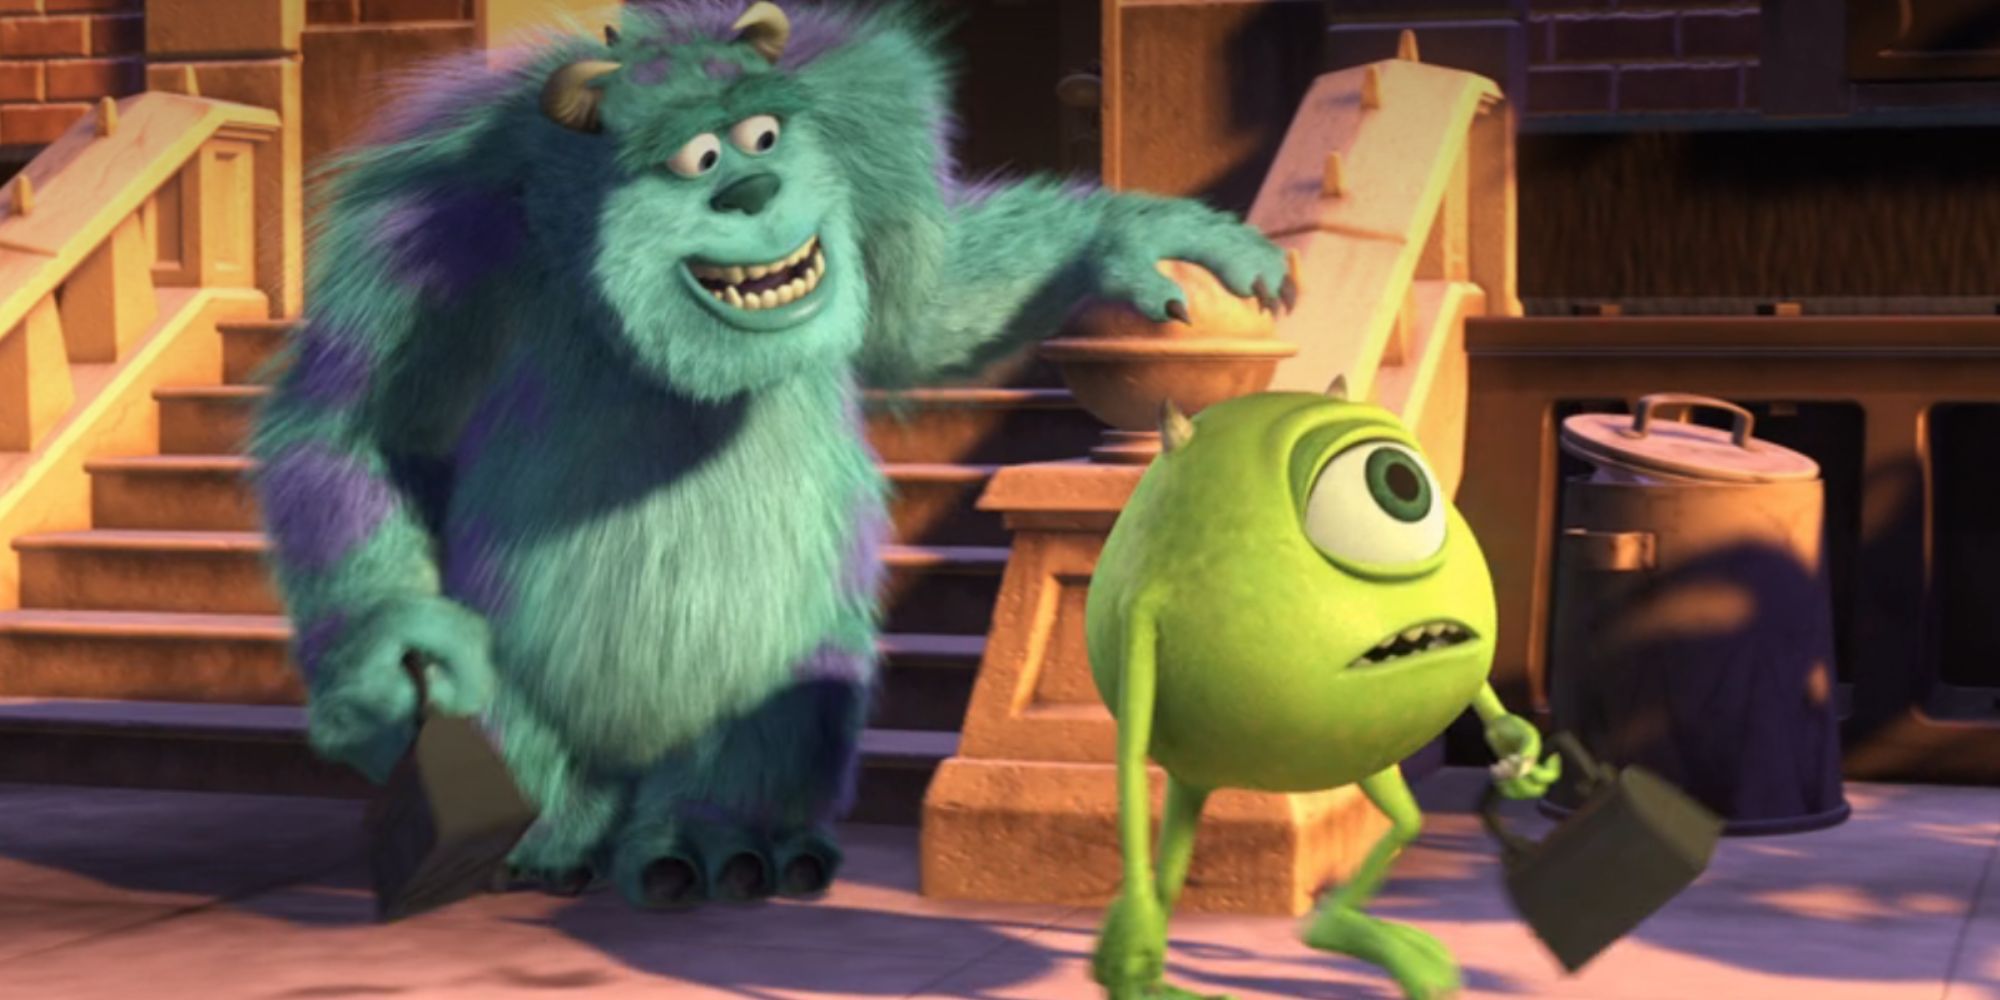 Sulley laughing at Mike in Monsters, Inc while Mike looks annoyed